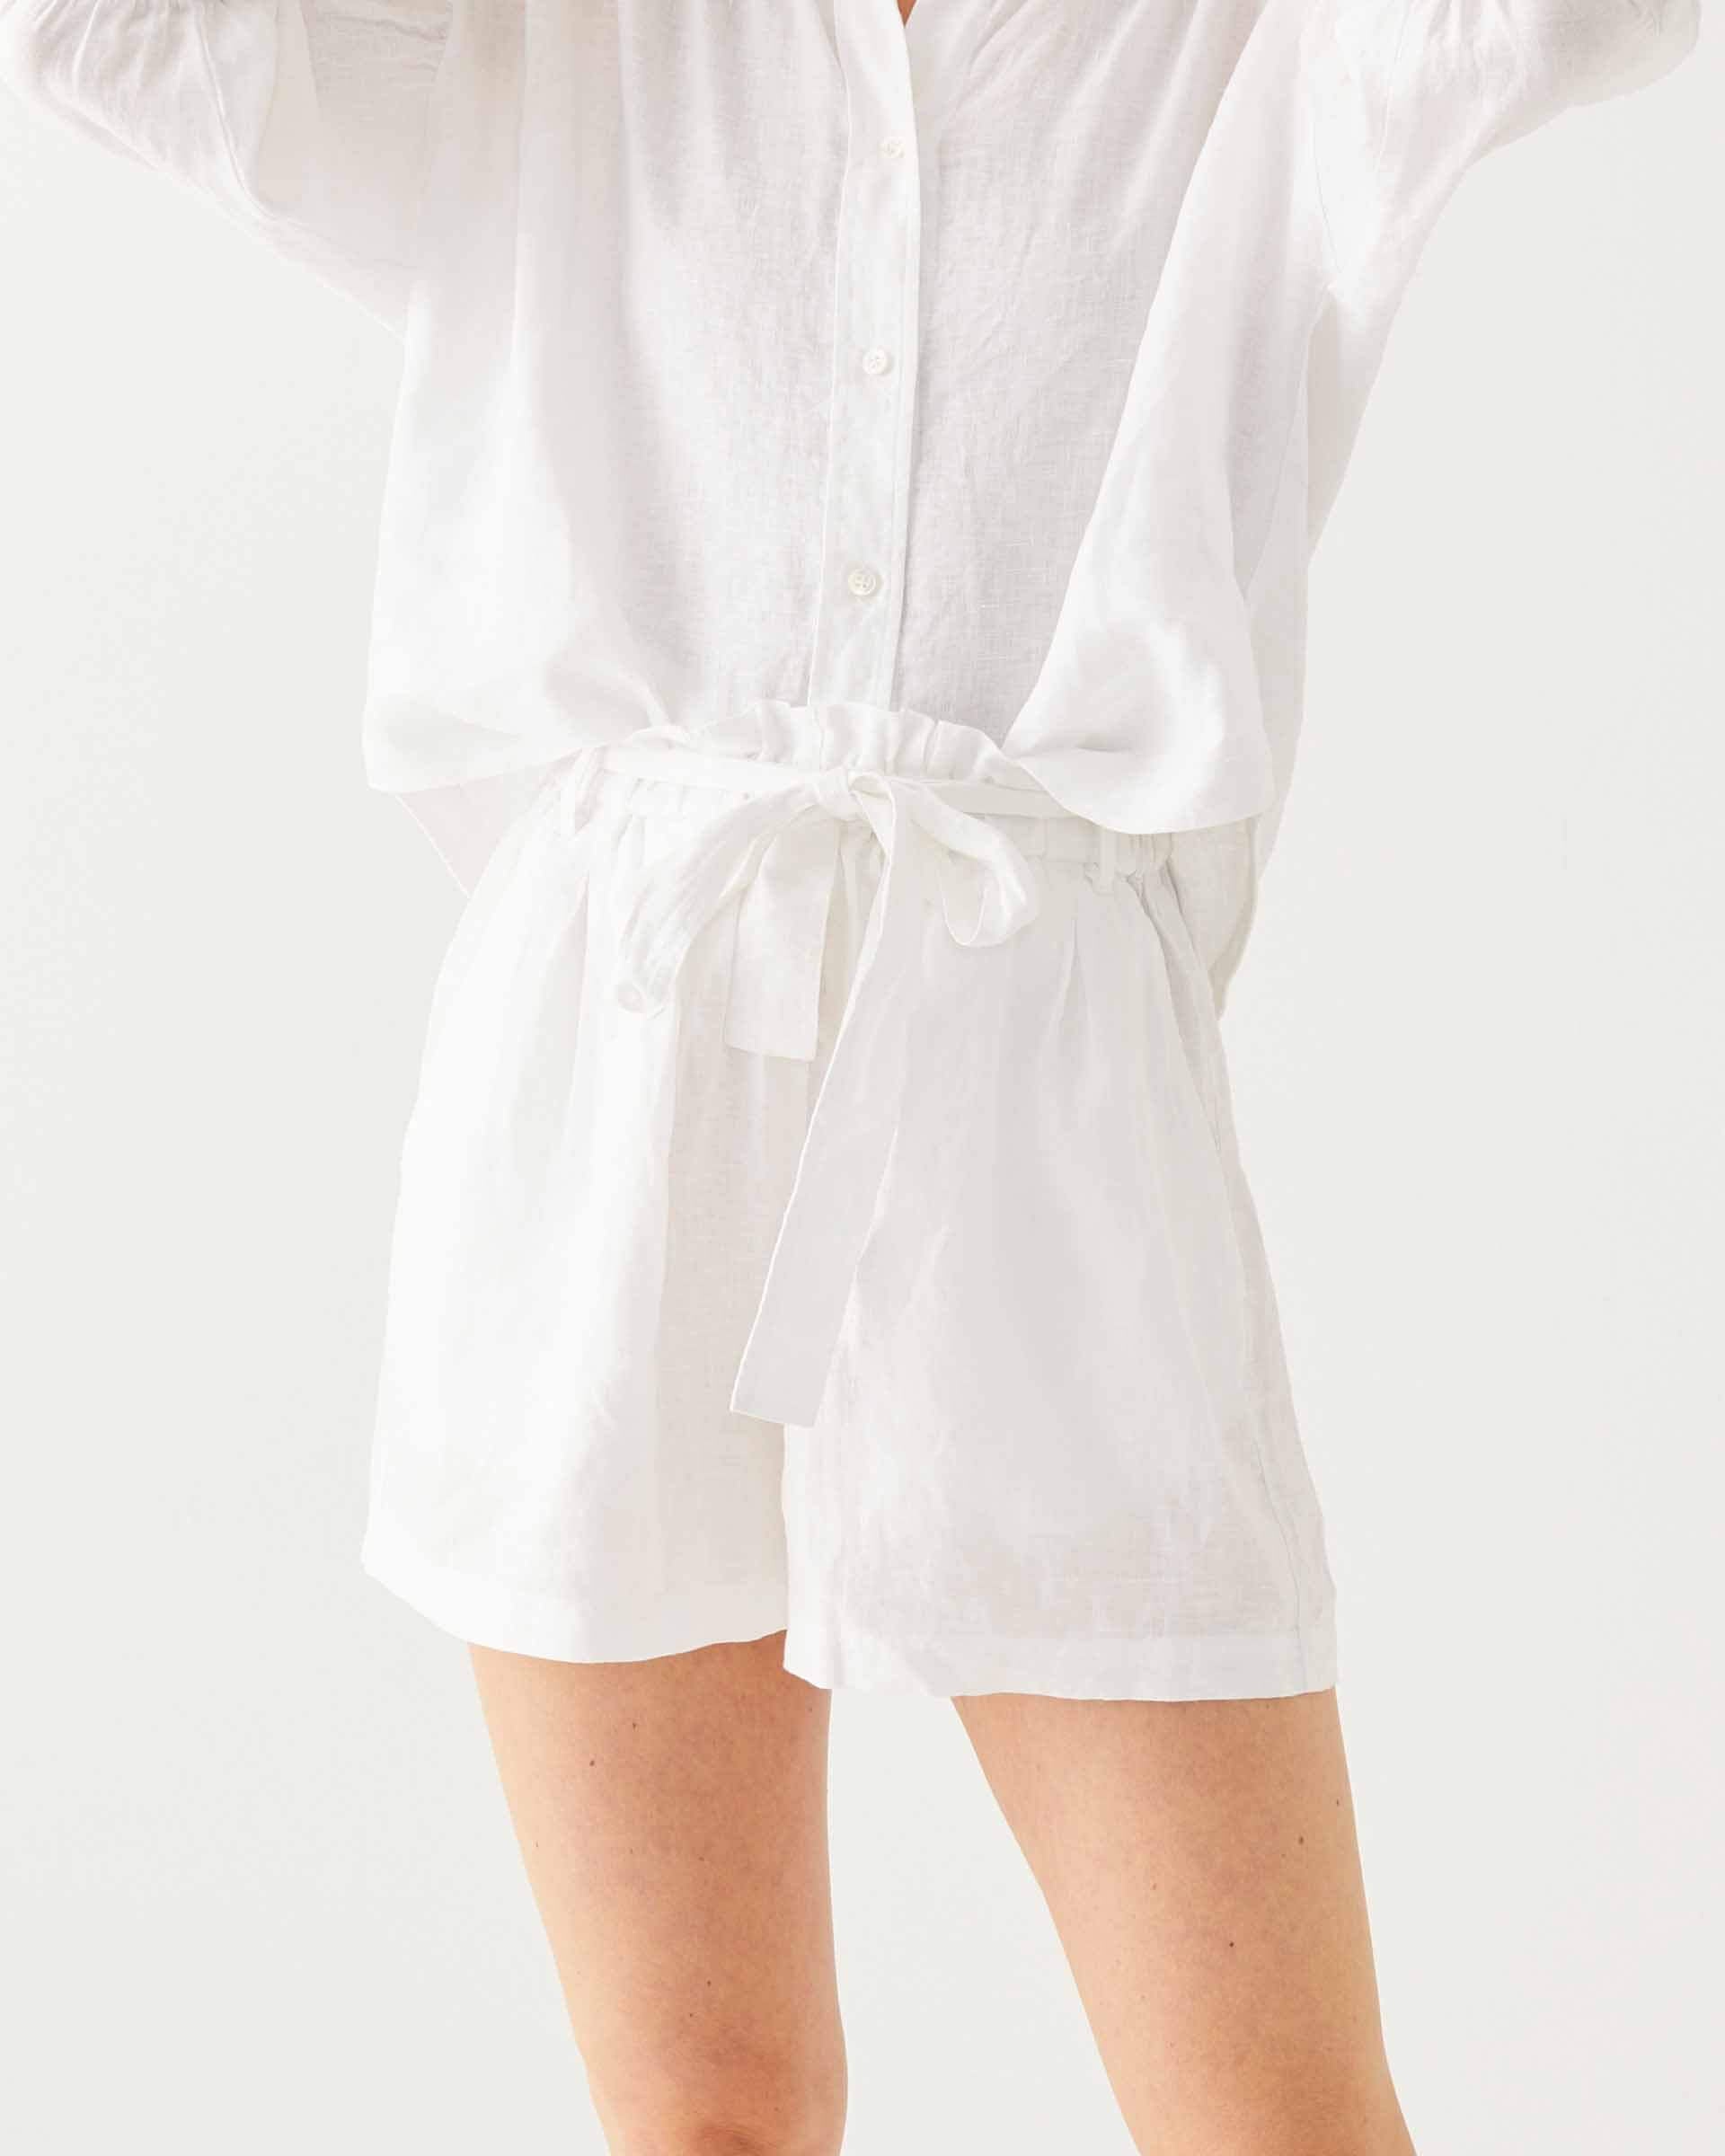 close up of female wearing white linen shorts with belt and matching top on a white background